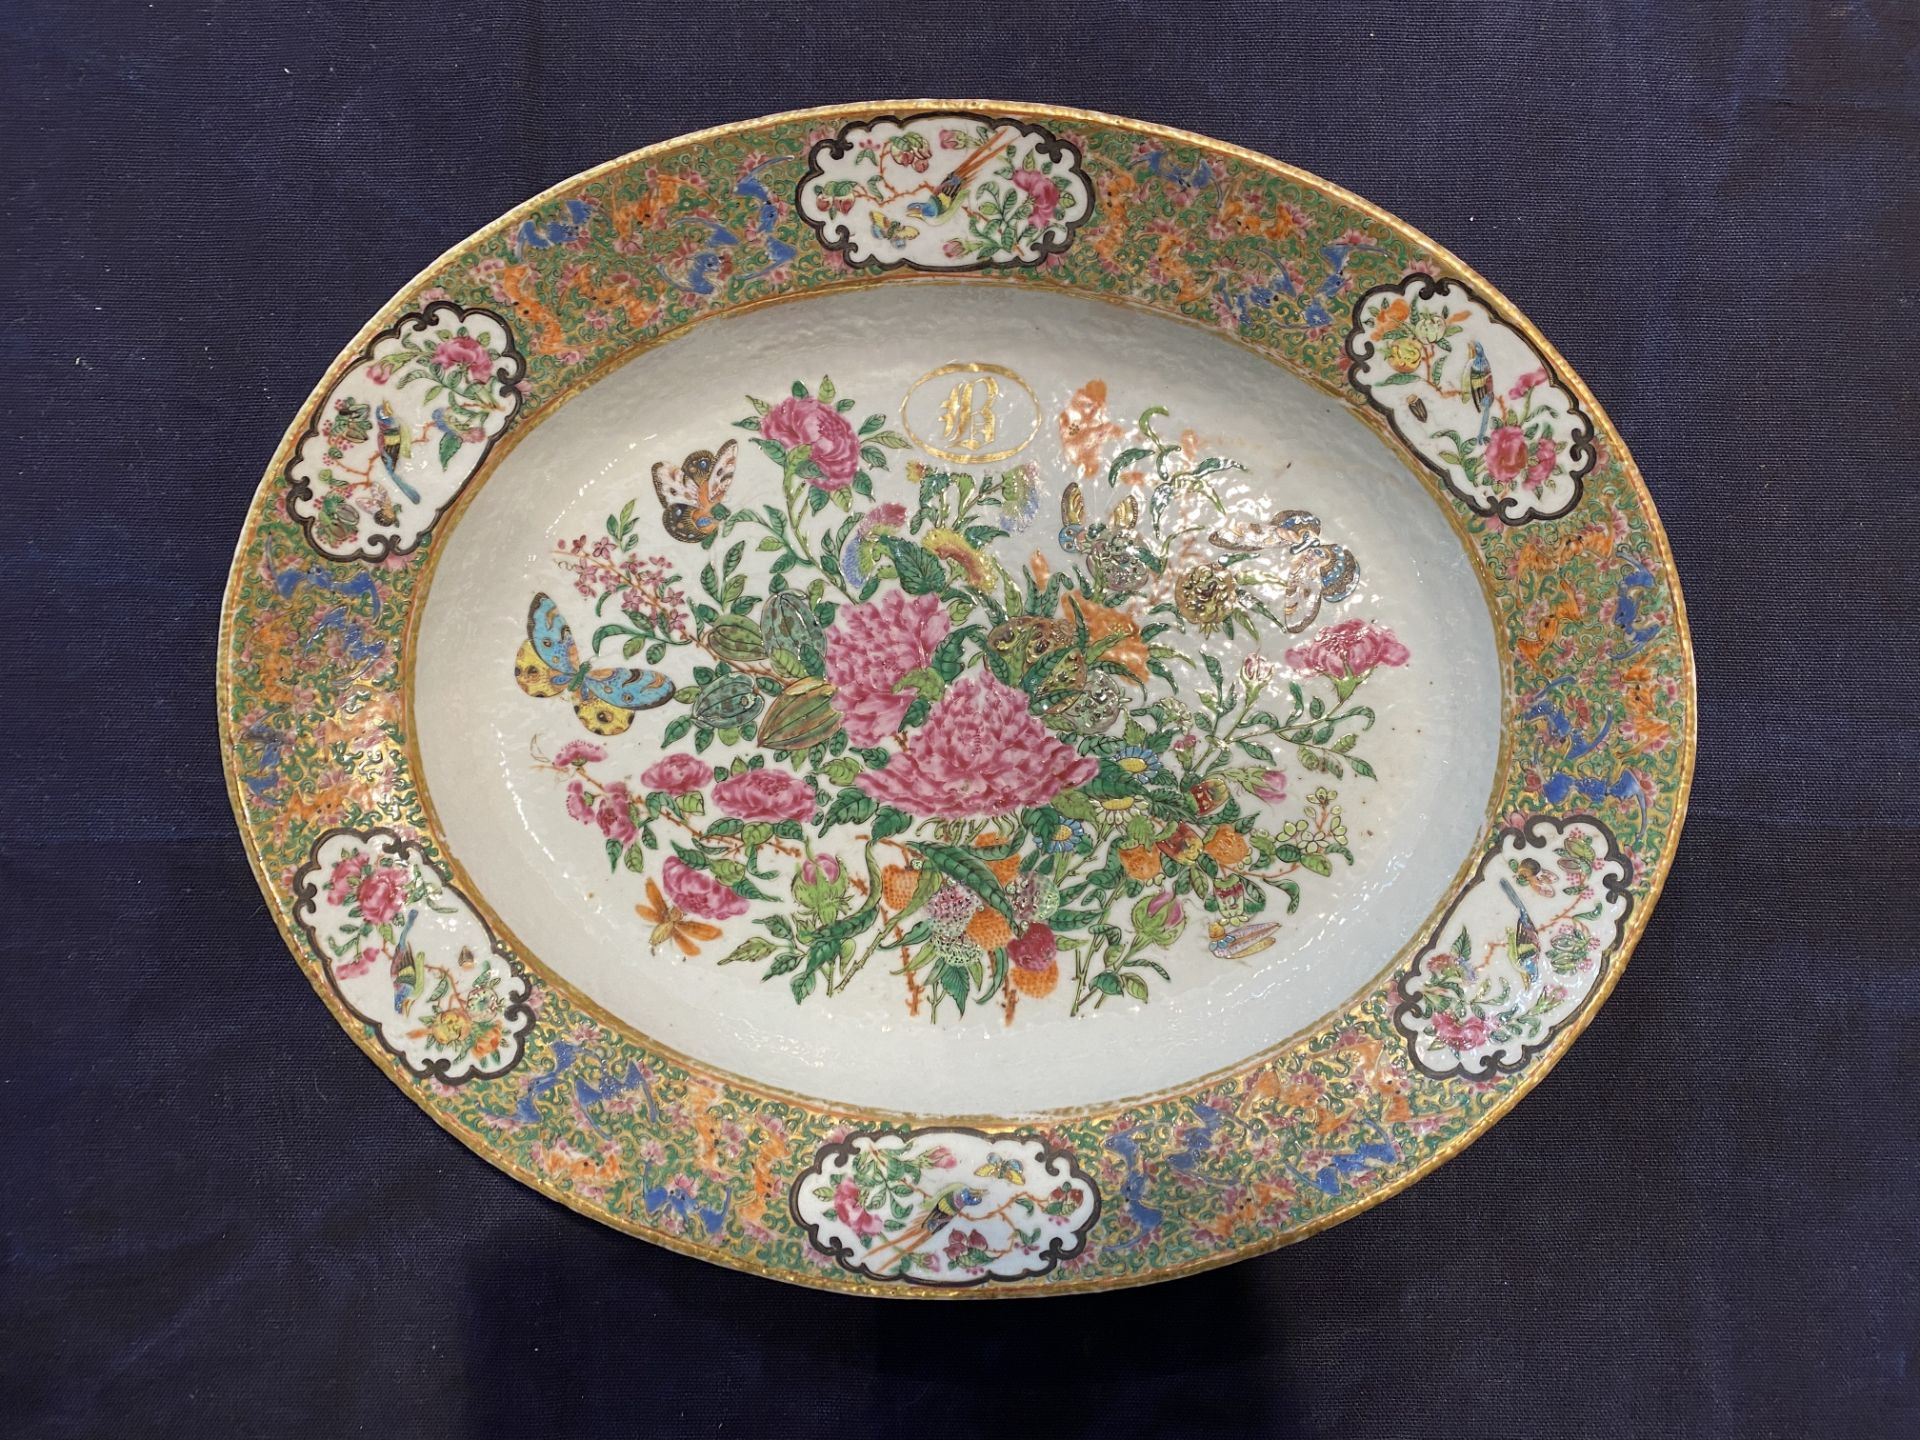 A varied collection of Chinese Canton famille rose porcelain with floral design and figures, 19th C. - Image 10 of 20